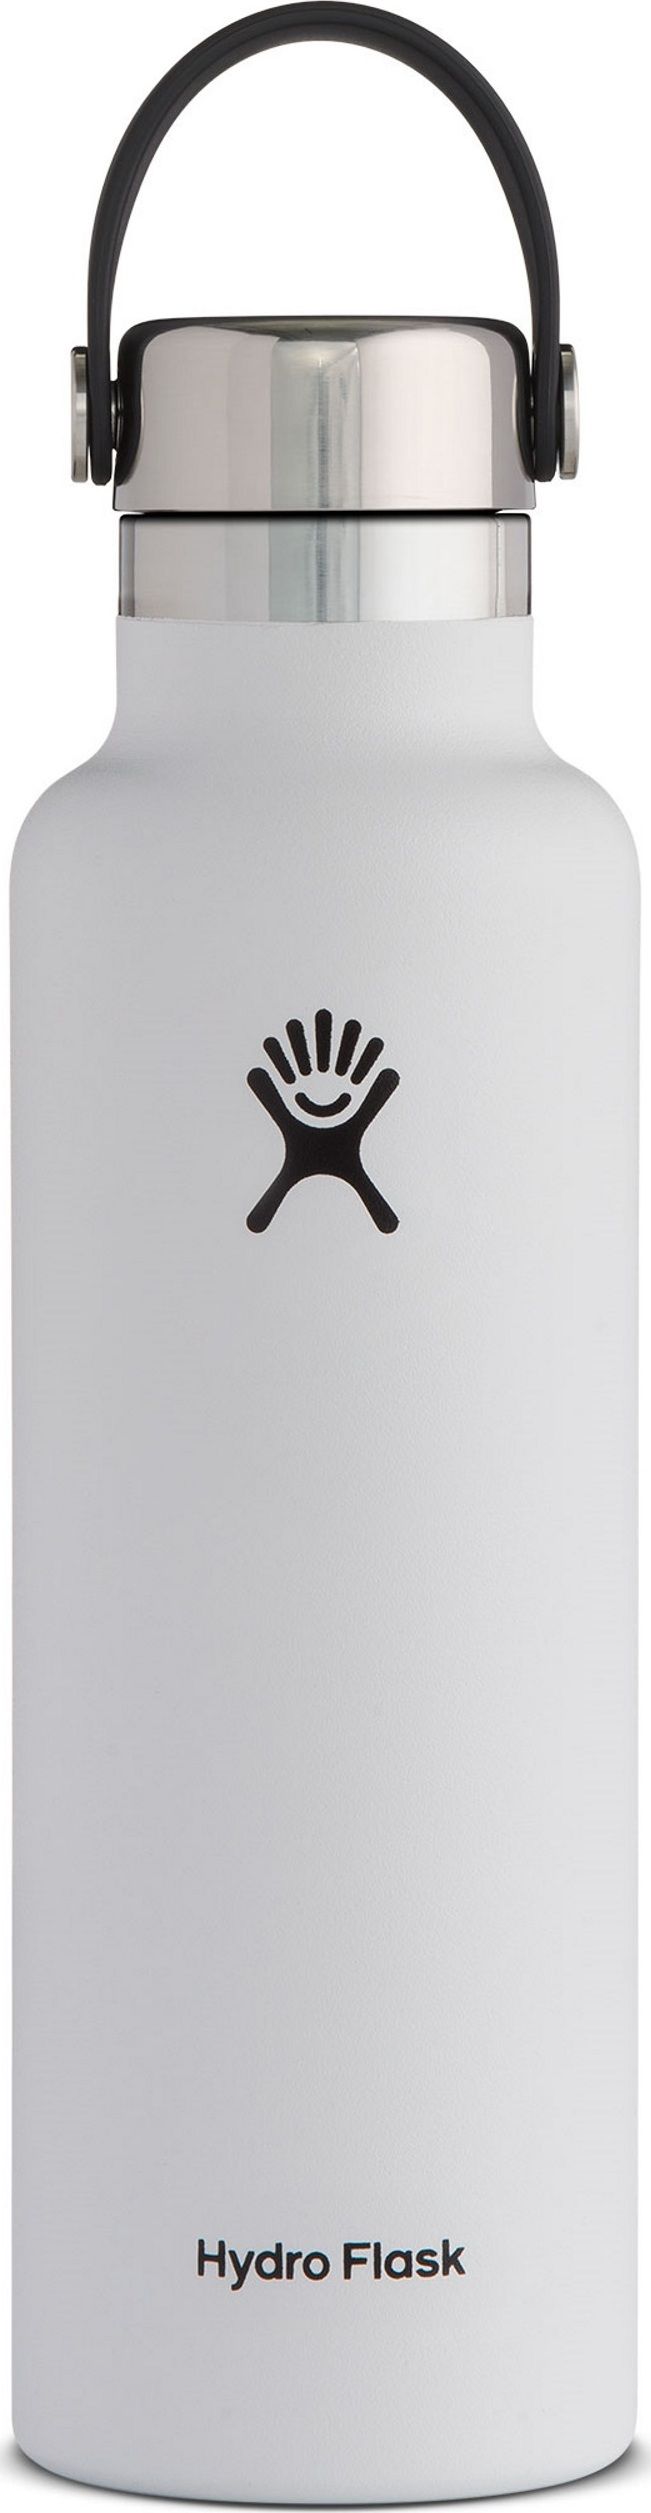 Standard Mouth Stainless Steel Cap 621 ml WHITE Hydro Flask